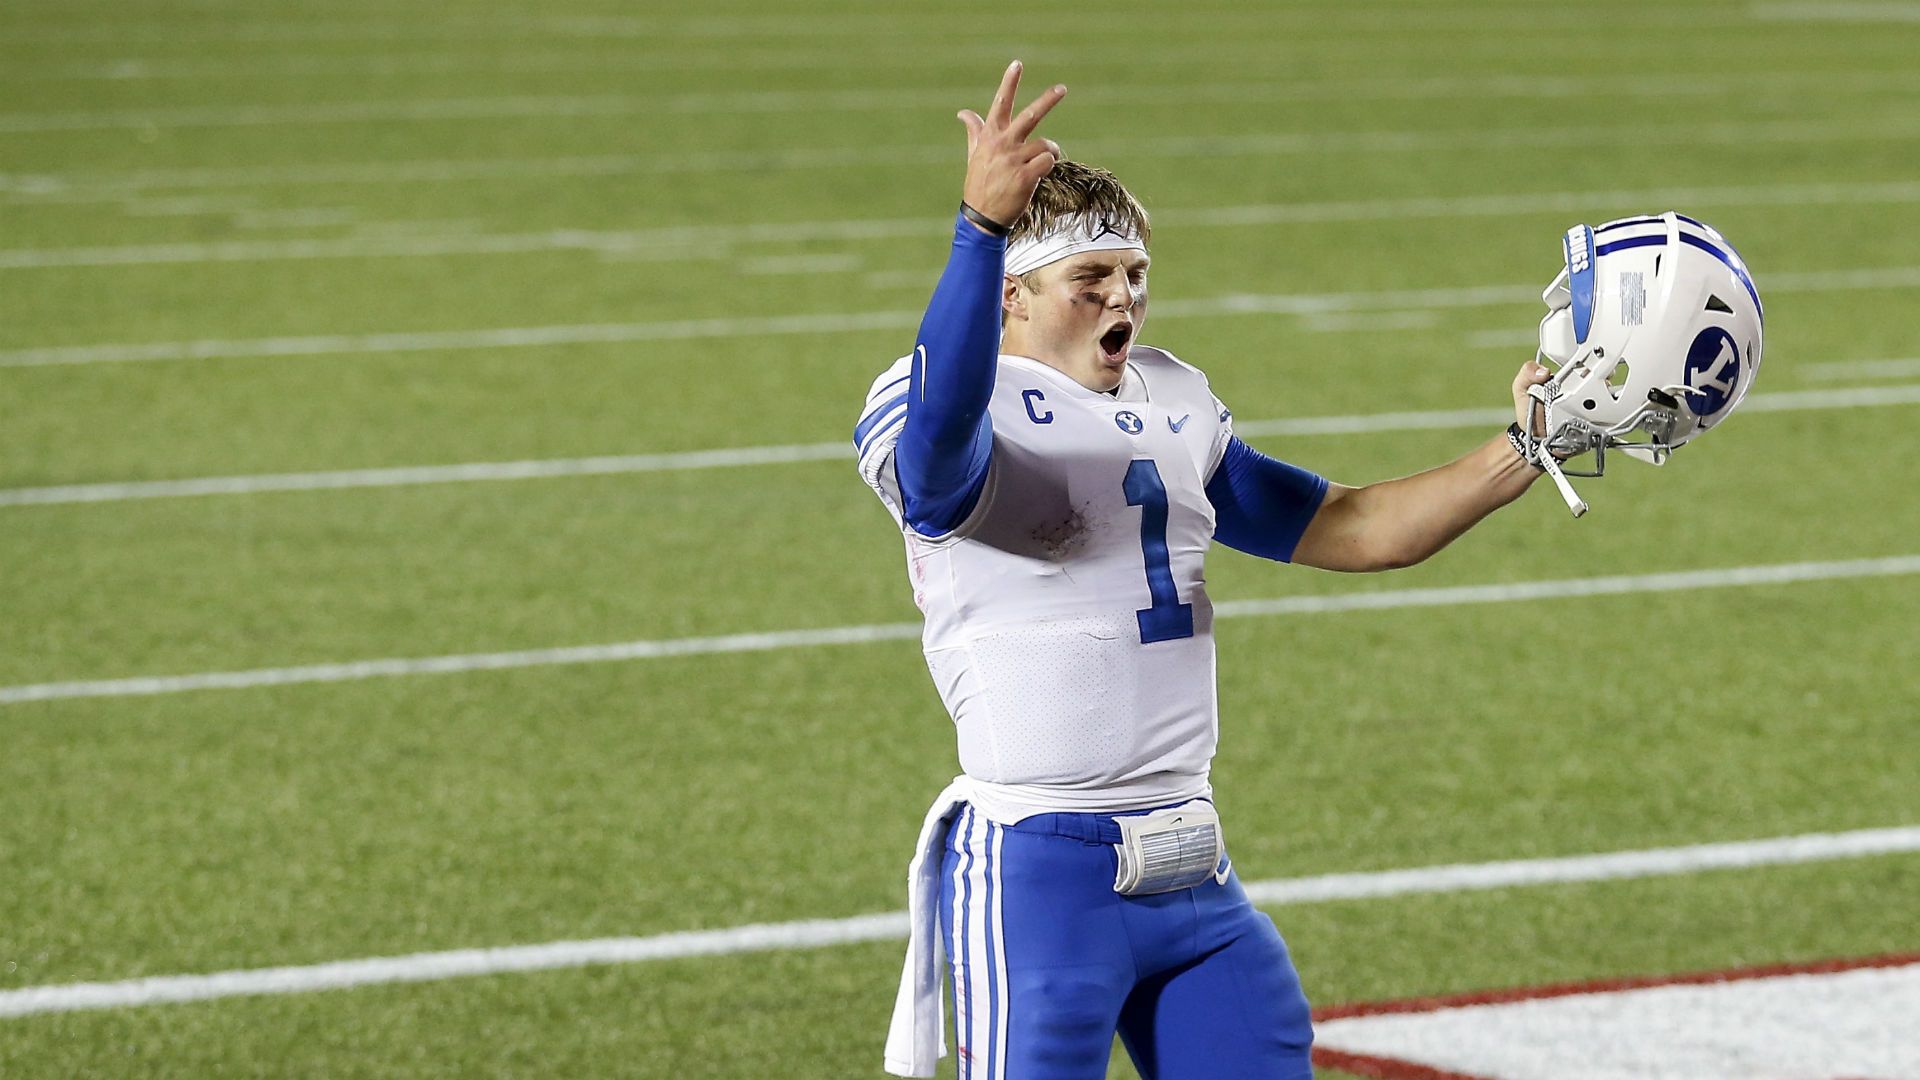 Meet Zach Wilson, BYU's Latest Quarterback Star And A Surging First Round NFL Draft Prospect